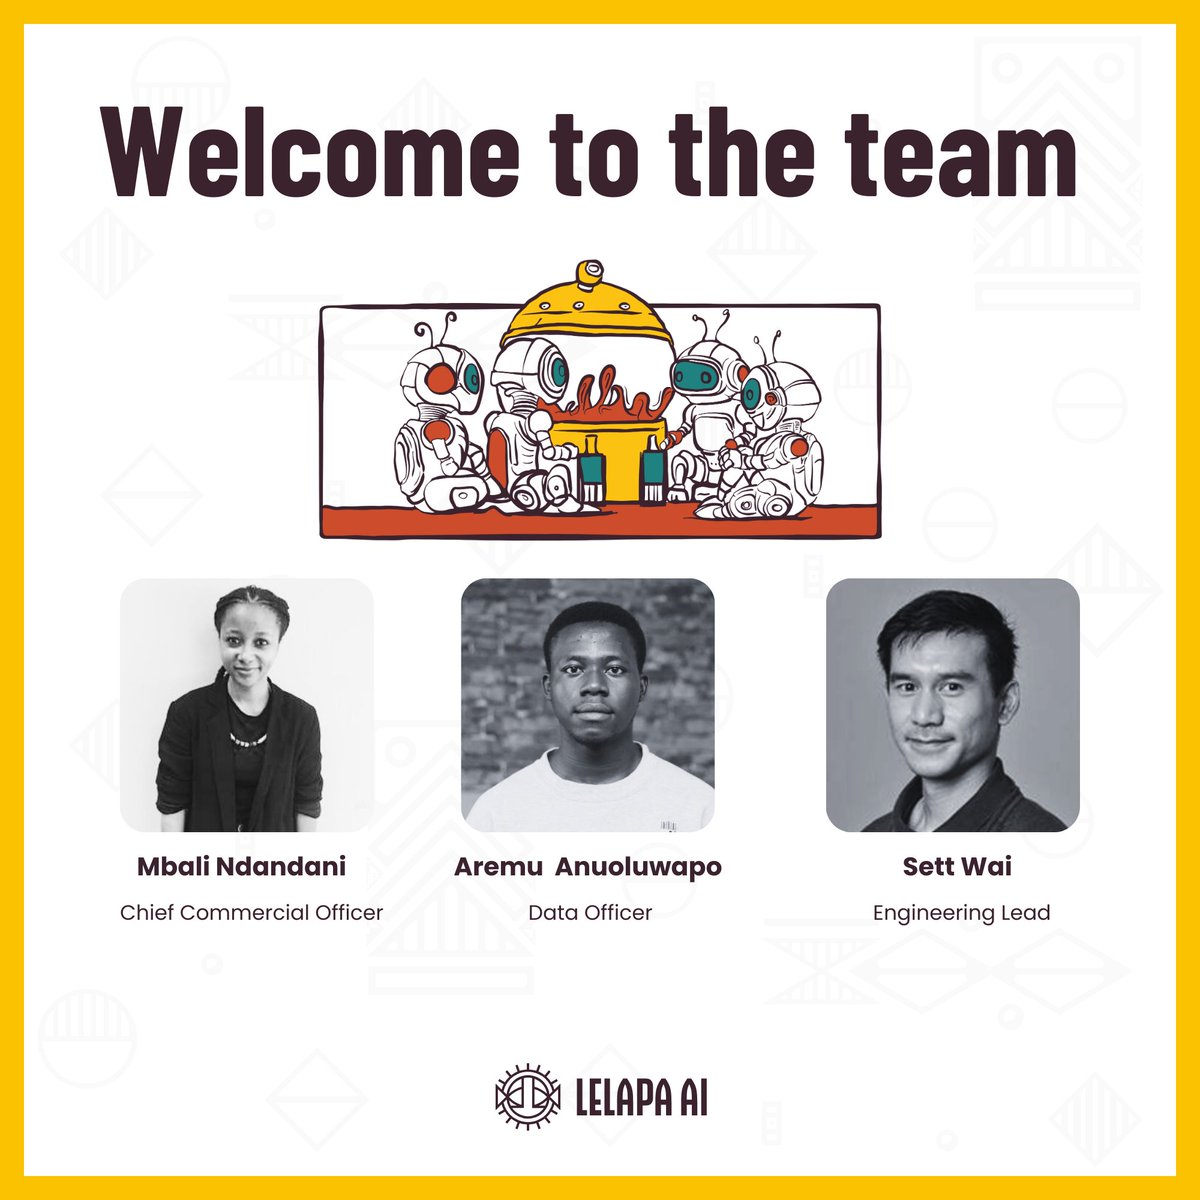 Hey everyone, let's give a big cheer for our three new team members who just joined our team.🥳🎊 Welcome aboard @MbaliNdandani, Aremu and Sett we’re happy to have you on the team and can't wait to see all the awesome stuff we'll accomplish together.🚀